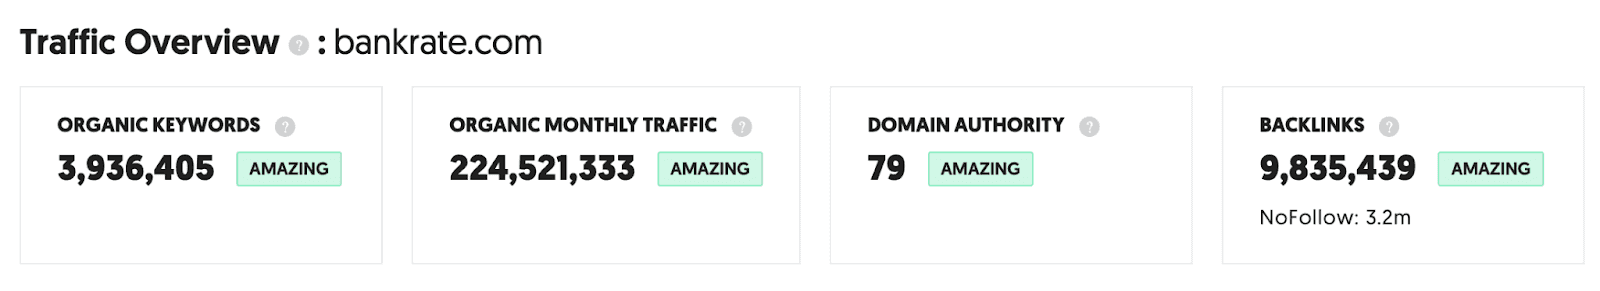 Bankrate's traffic overview stats